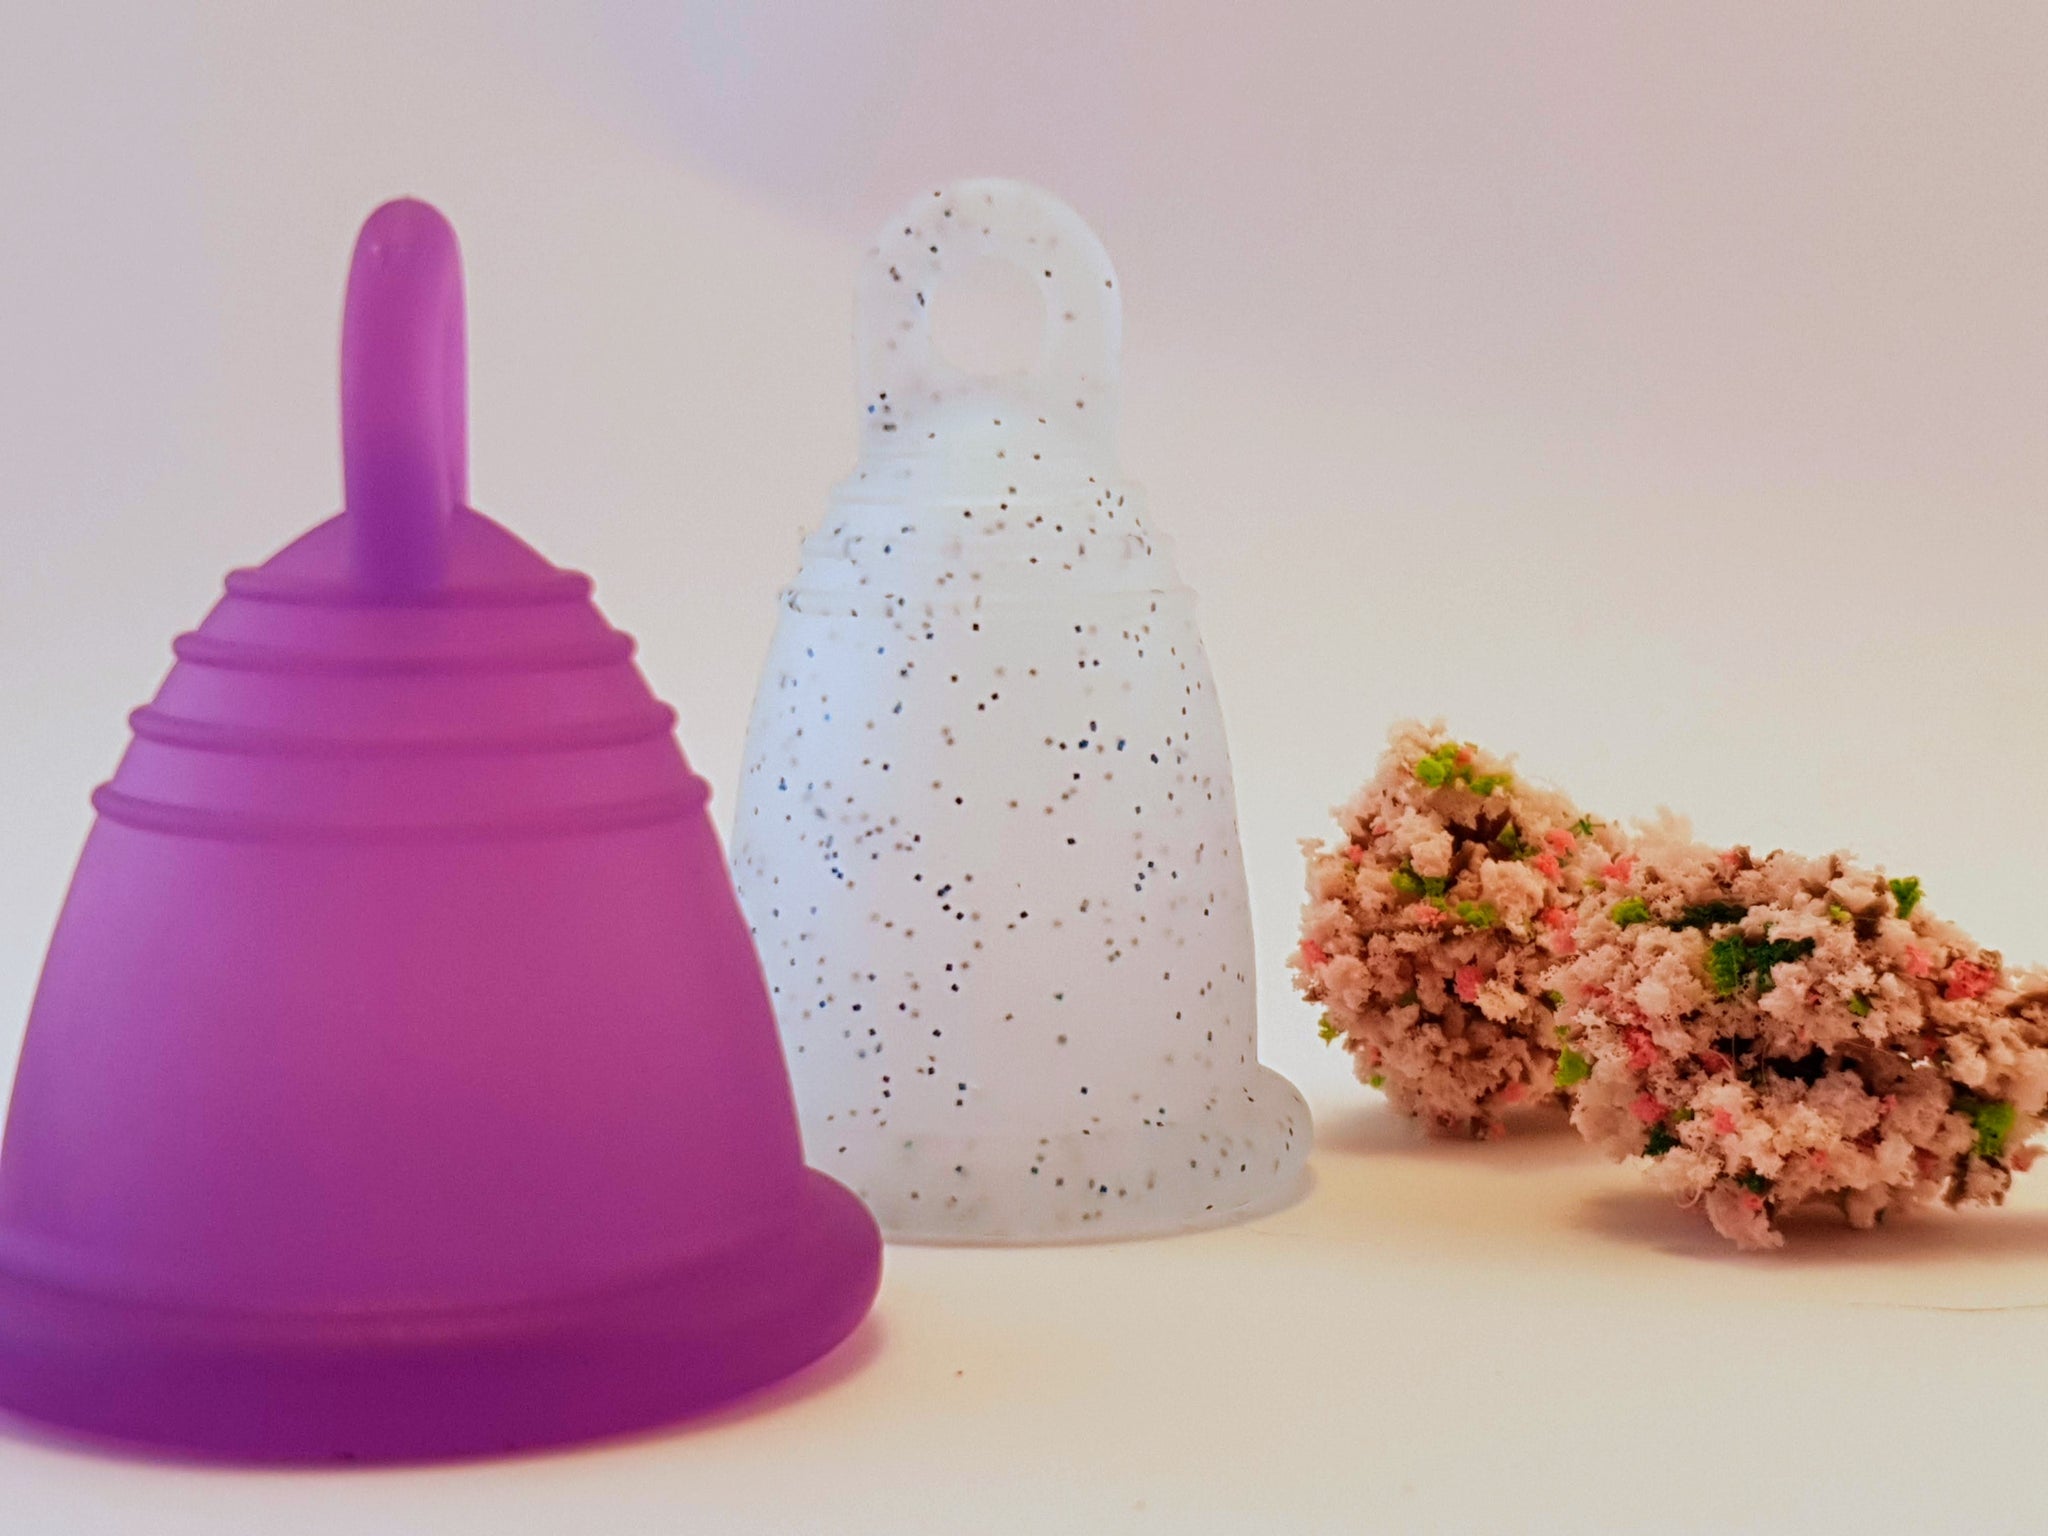 blue glitter menstrual cup, white background and pink flowers and a purple menstrual cup, classic Meluna . This menstrual cup is made from reusable soft silicone, the perfect eco-choice for sister's who want a safe, healthy, non toxic, latex free, BPA free and waste free period product lifestyle. Easy to use and provides 12 hours of protection. גביעונית מחזור או כוס לווסת הכי טובה ונוחה בארץ